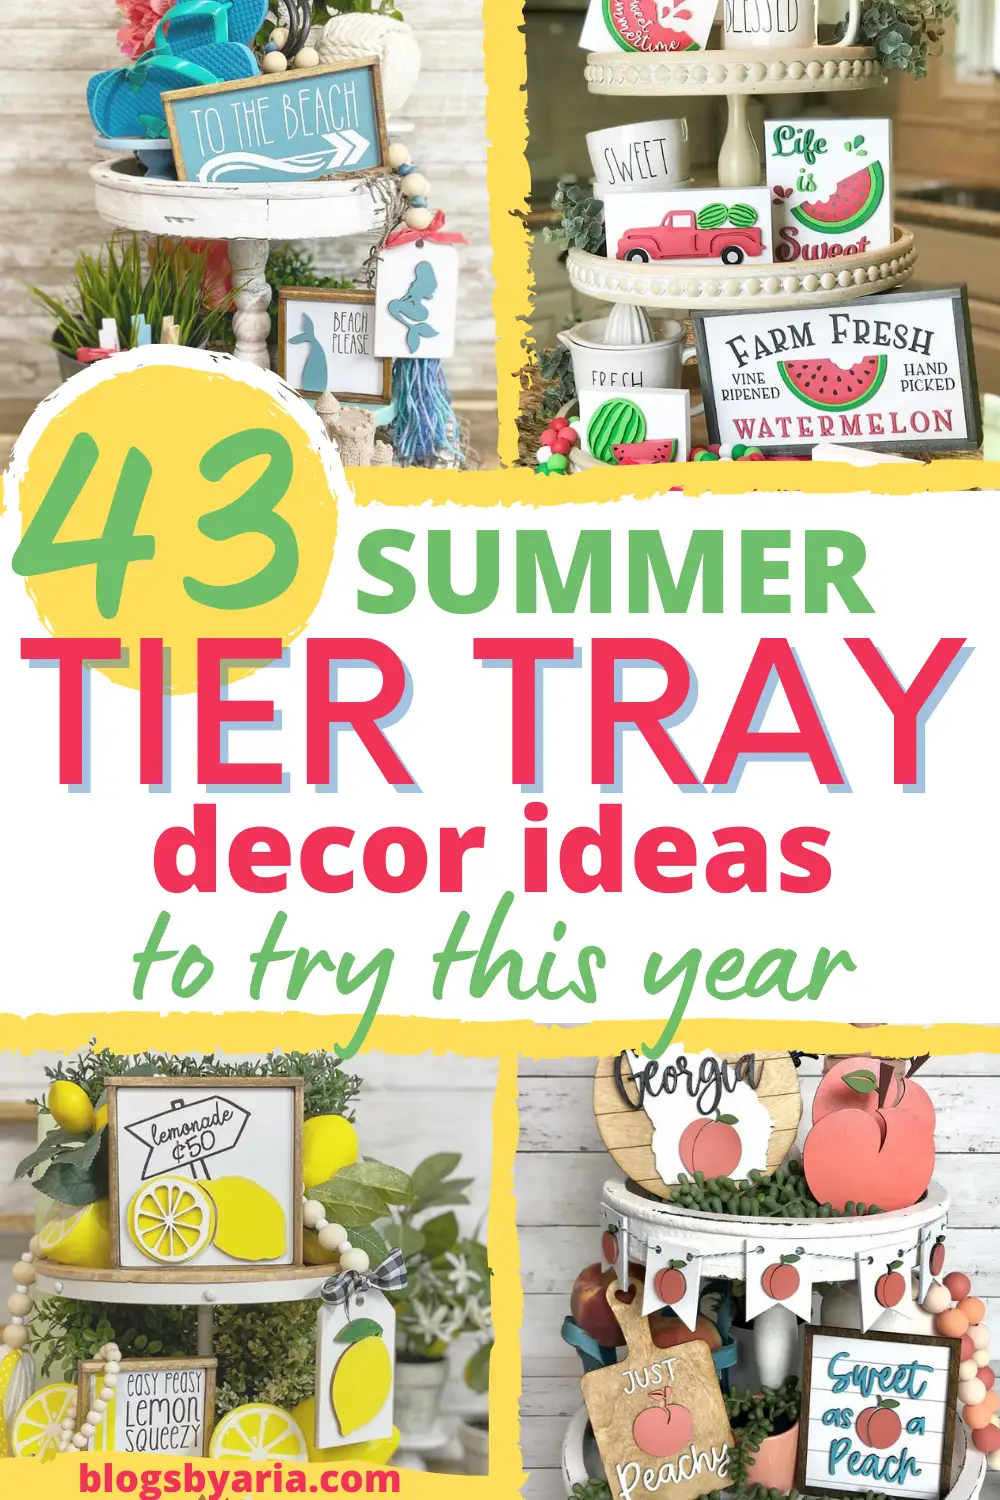 https://www.blogsbyaria.com/wp-content/uploads/2021/04/43-summer-tier-tray-decor-ideas-to-try.png